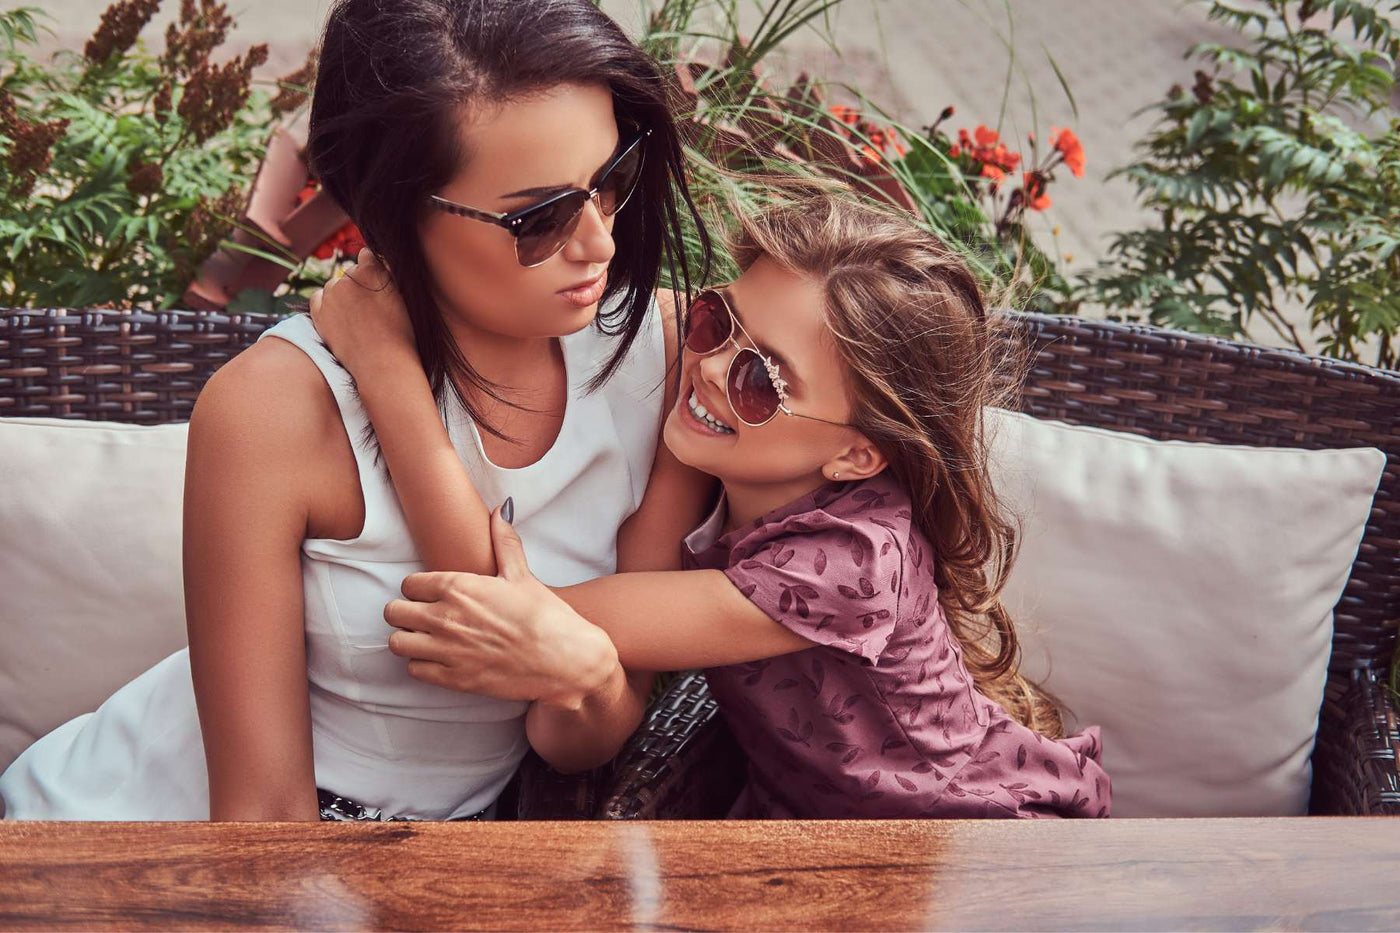 Dressing and Styling Tips for Moms: How to Look Fashionable and Put-Together